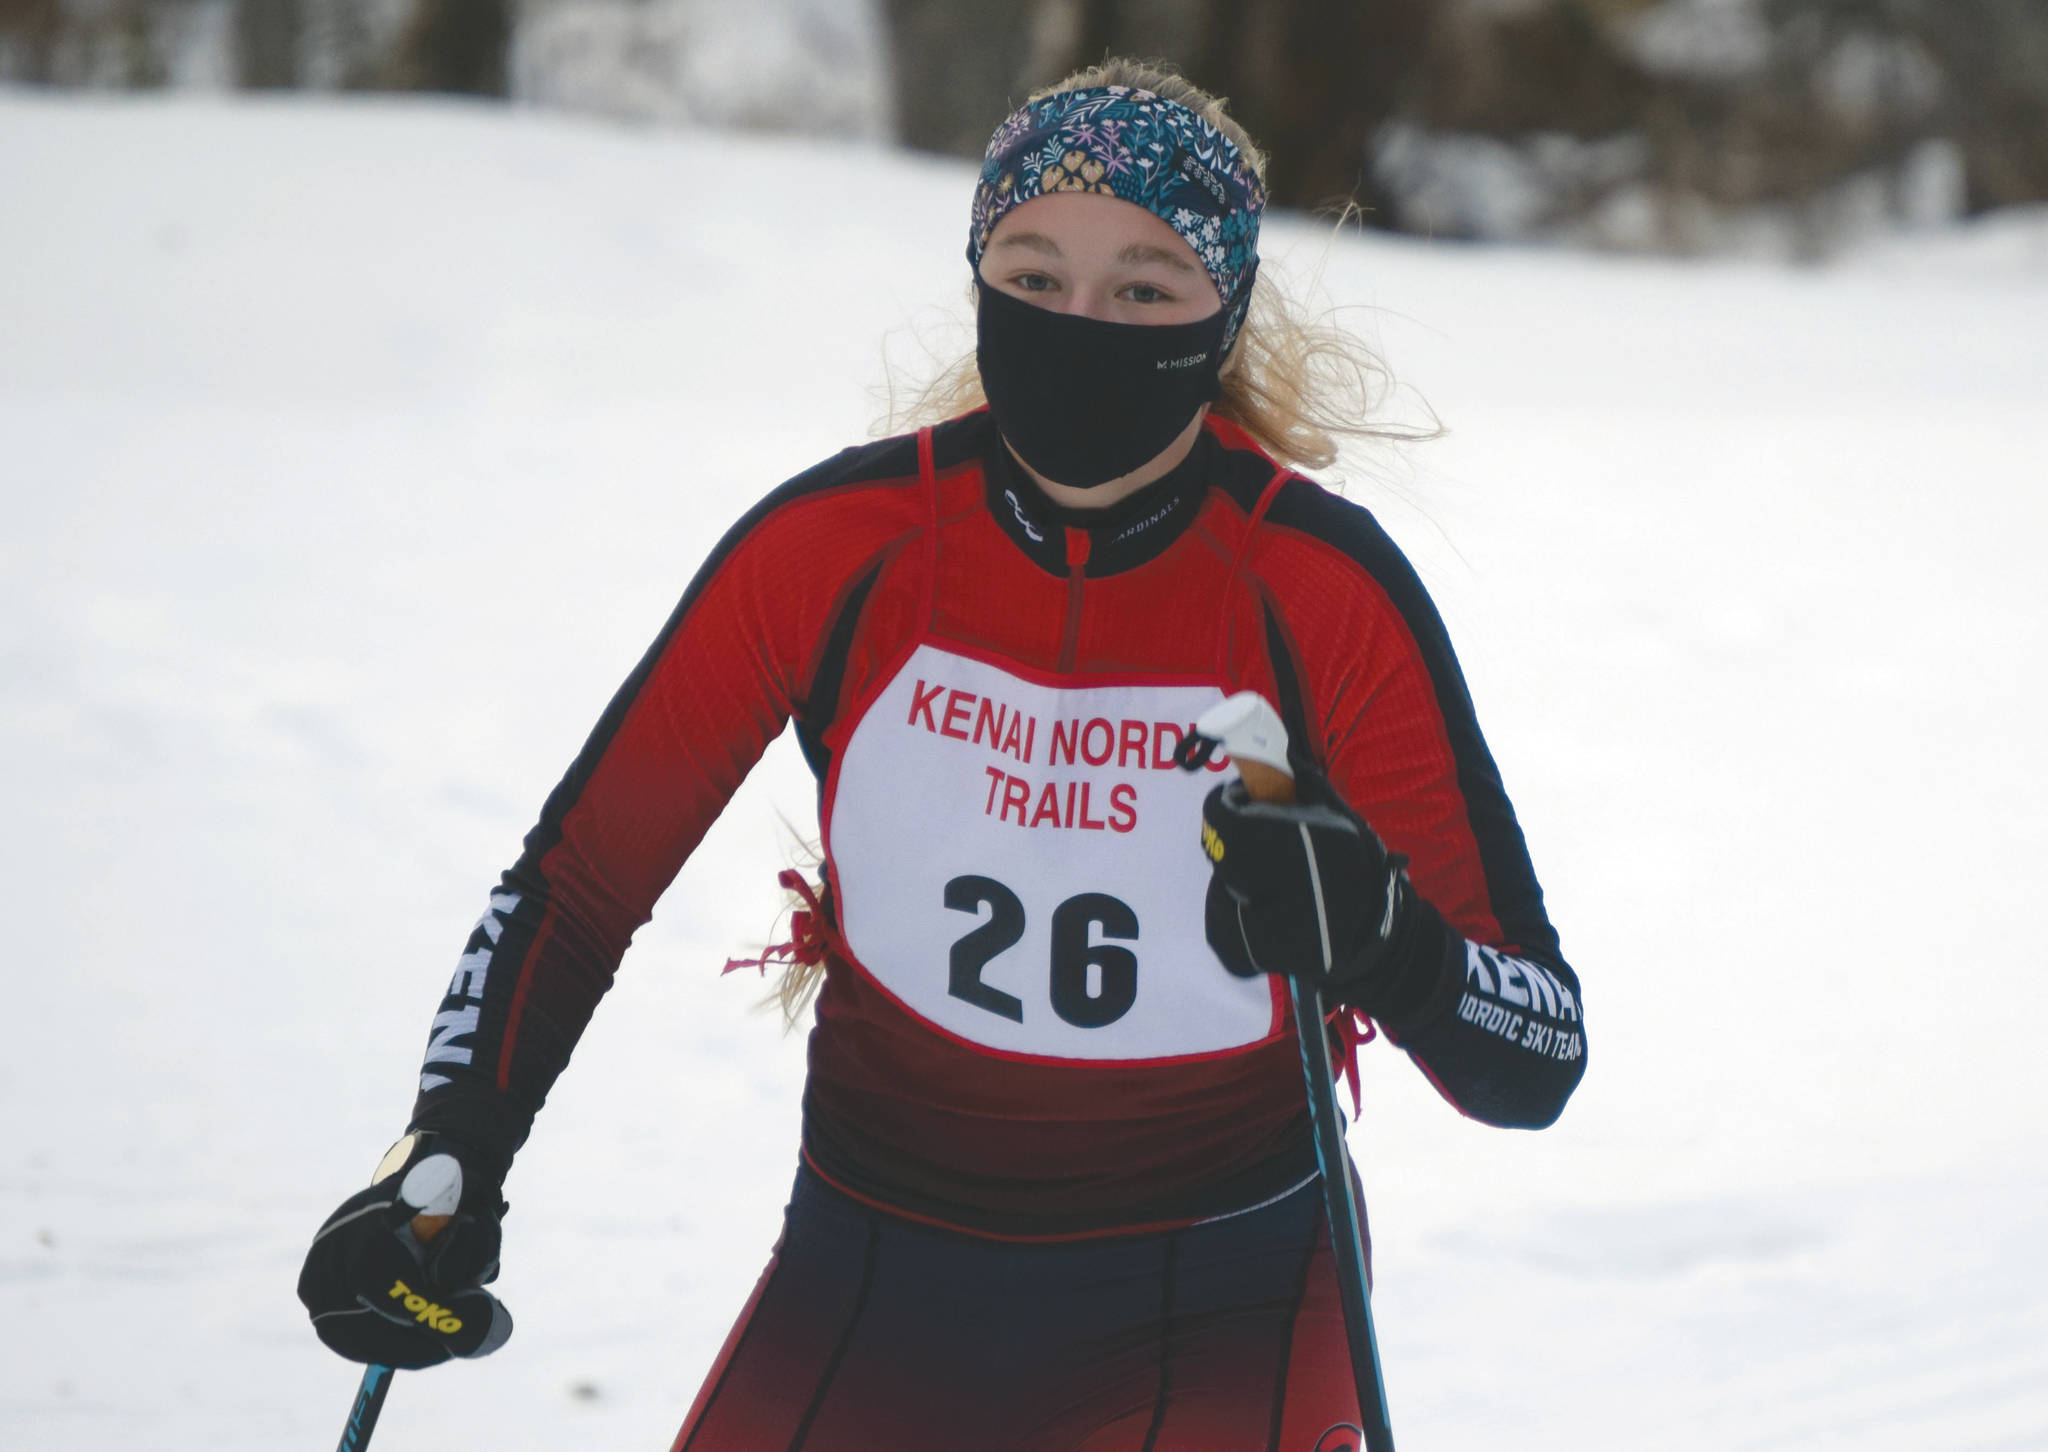 Kenai Central’s Emily Moss takes the victory in the girls race at the Kenai Nordic Trails on Saturday, Jan. 16, 2021, at Kenai Golf Course. (Photo by Jeff Helminiak)